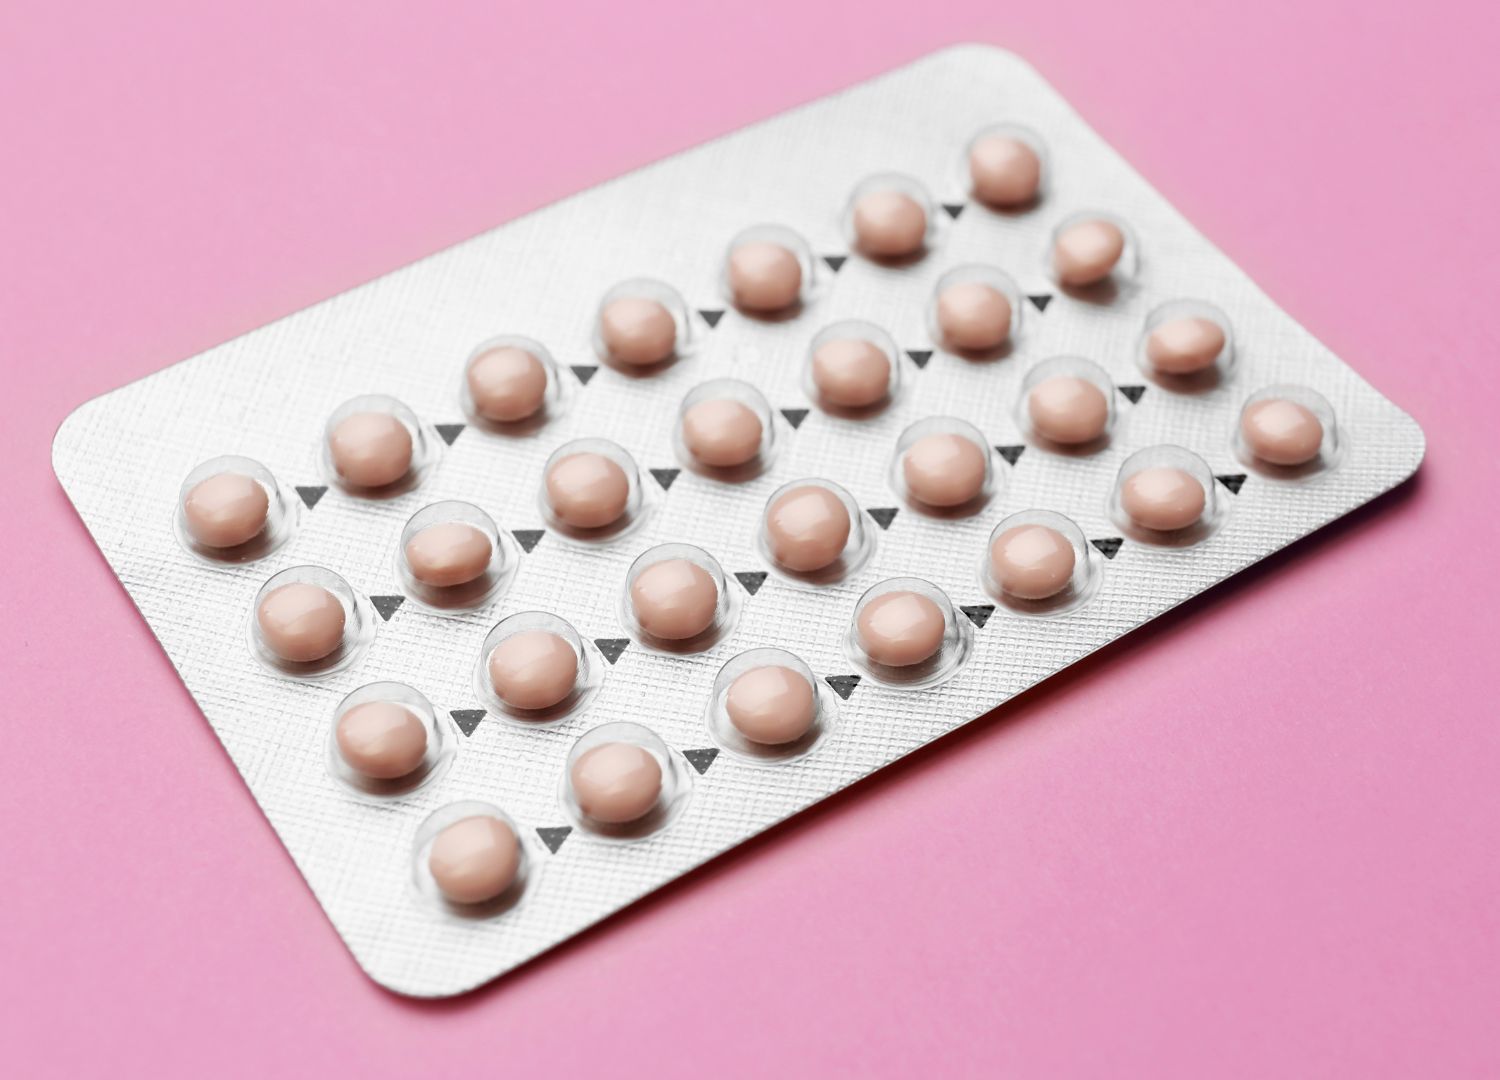 Debunking common myths about contraceptives